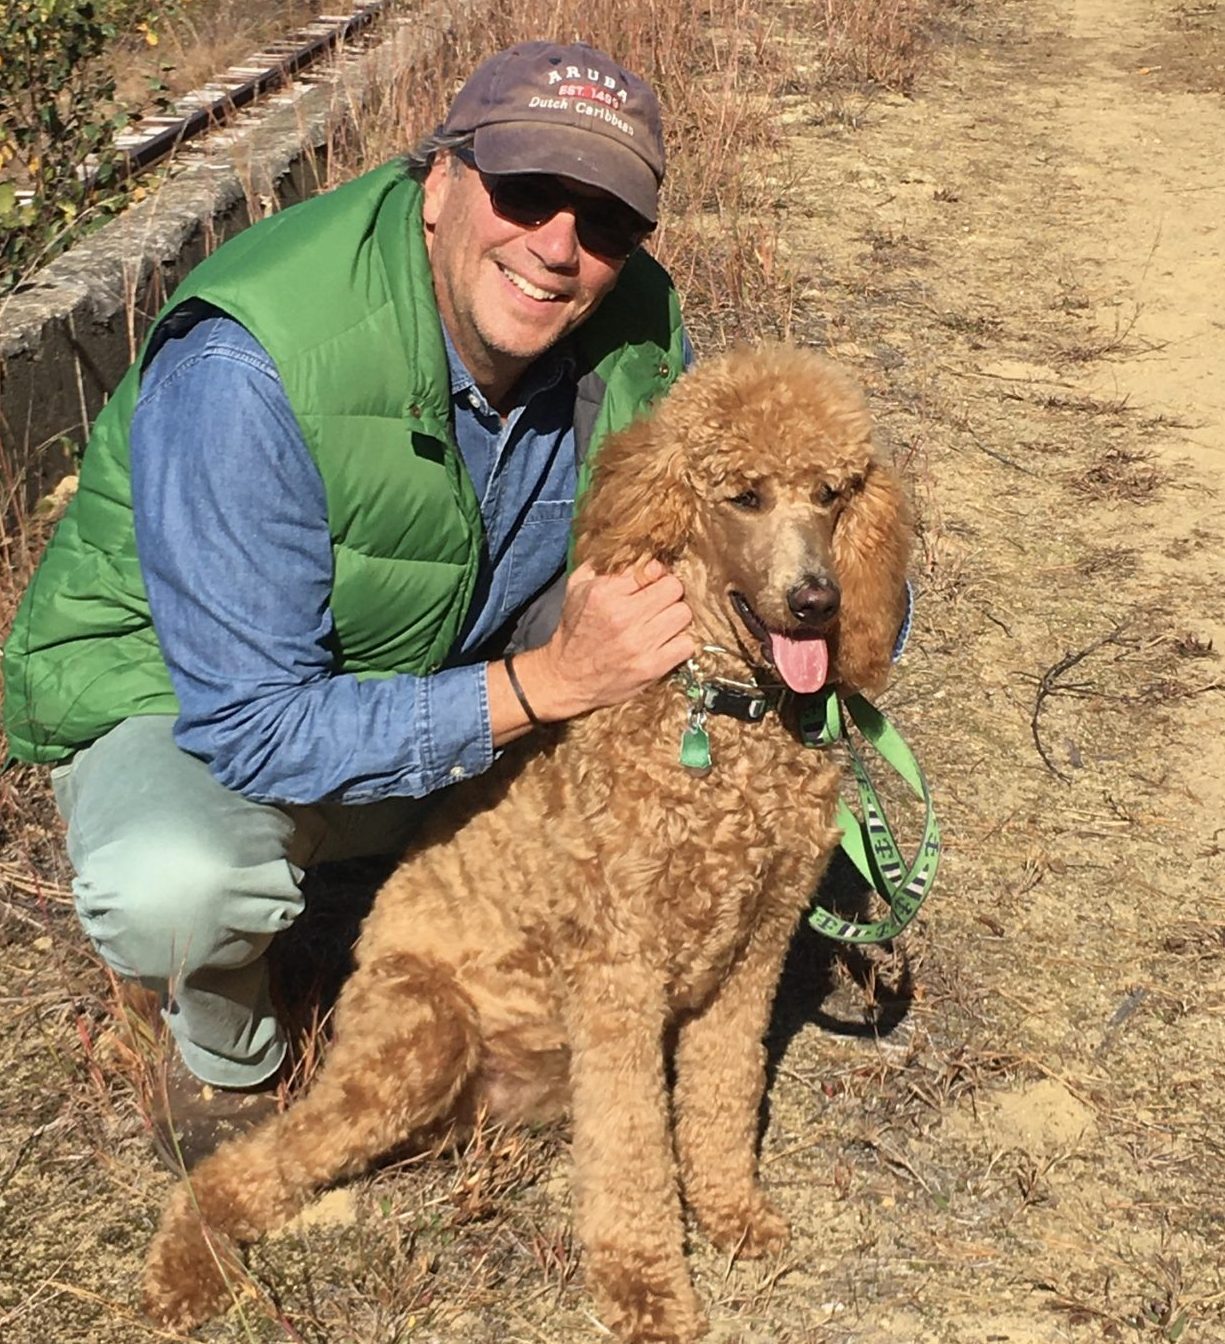 Stephen Conant posing with a tan poodle